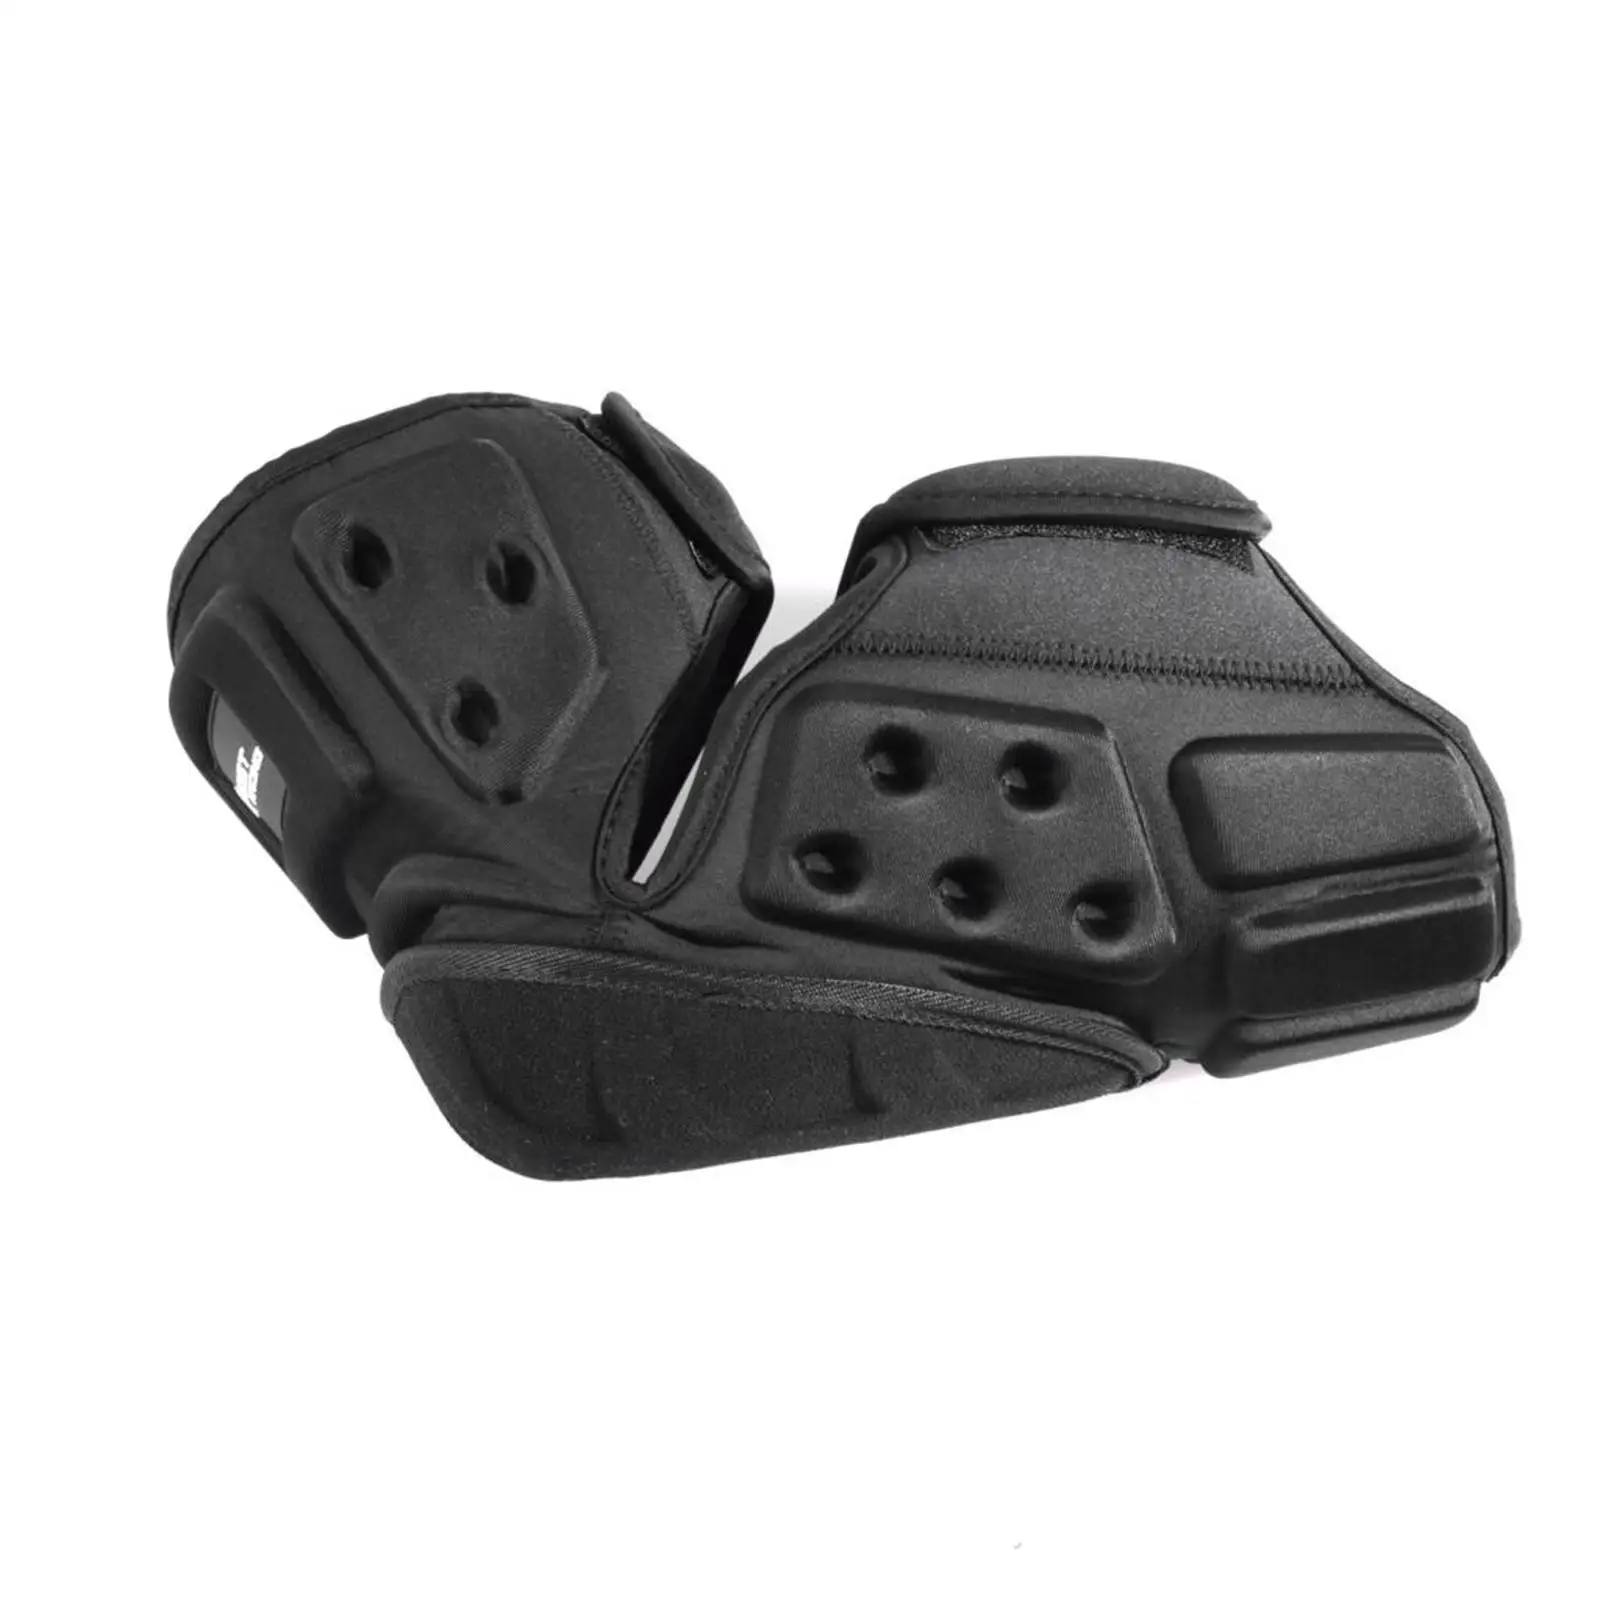 Motorcycle Elbow Knee Protector,Knee Shin Guard Pads for